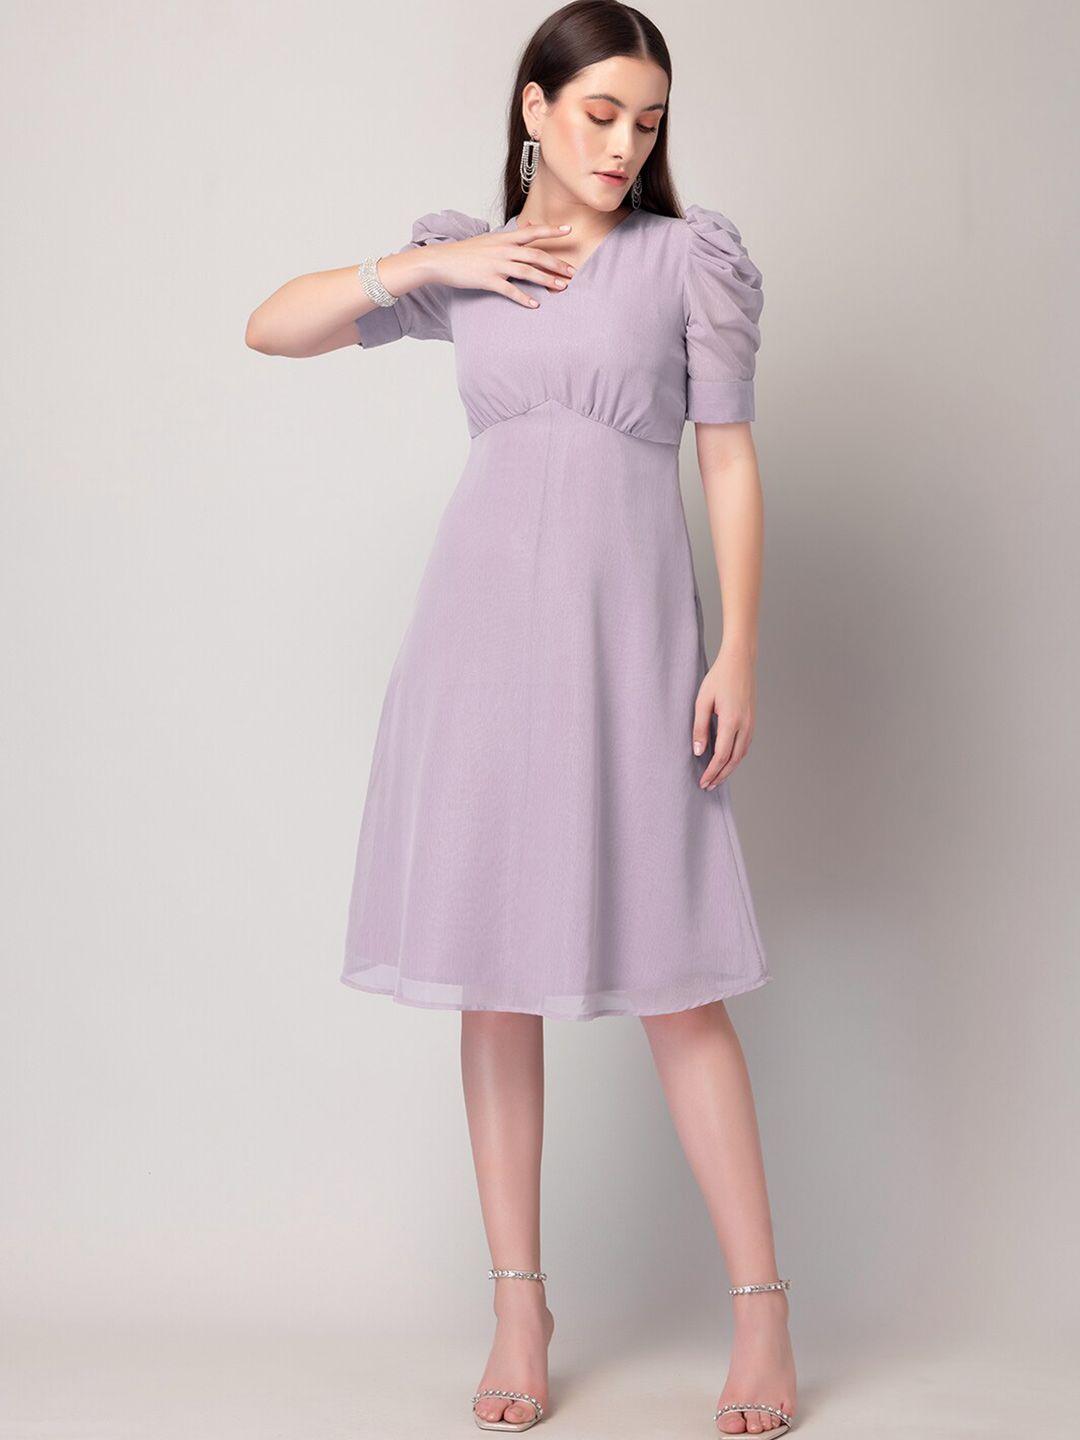 faballey purple v-neck puff sleeves gathered empire dress